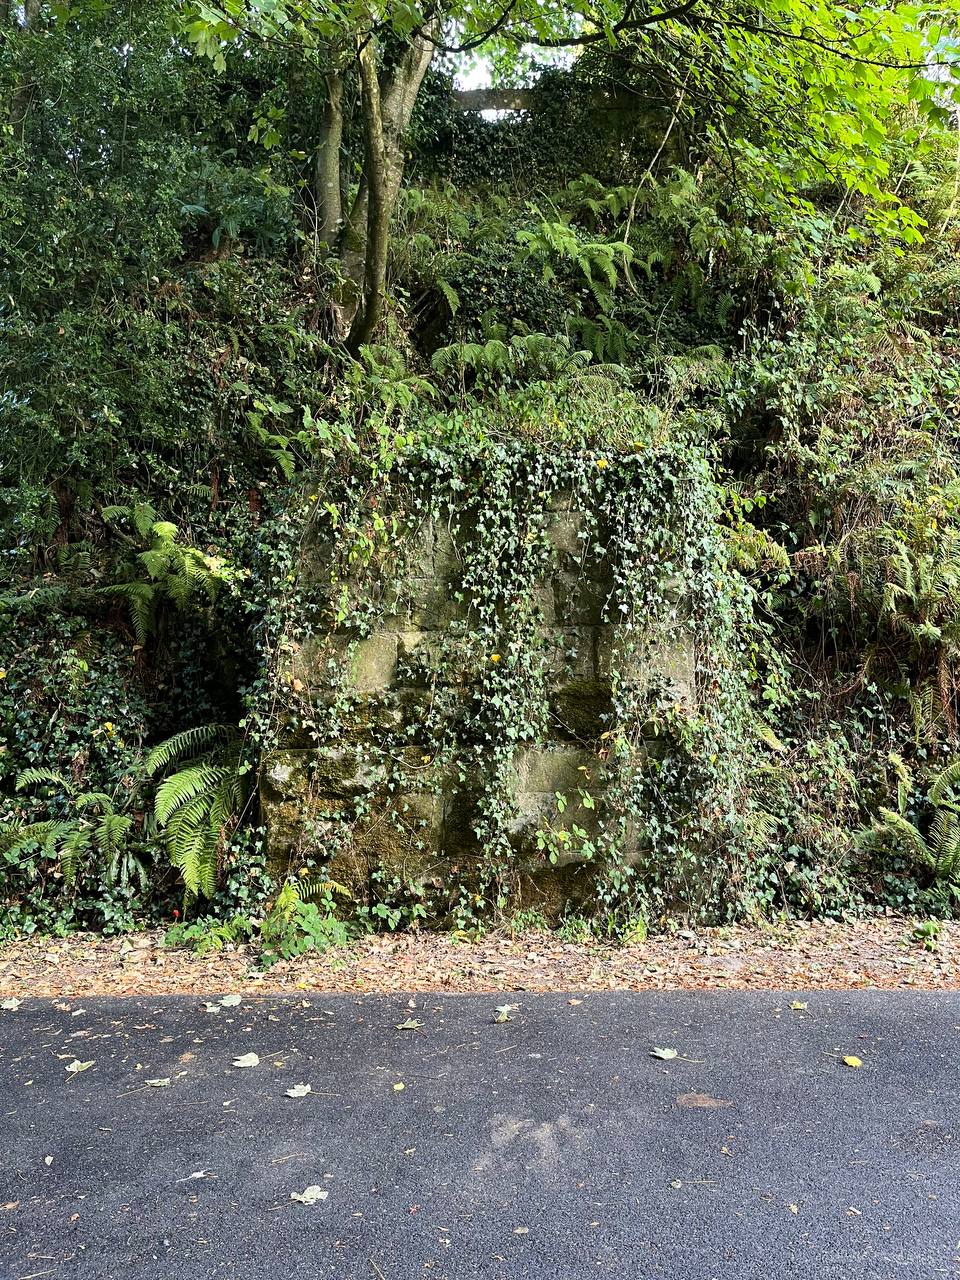 A stone structure overgrown with moss, ivy, and fern